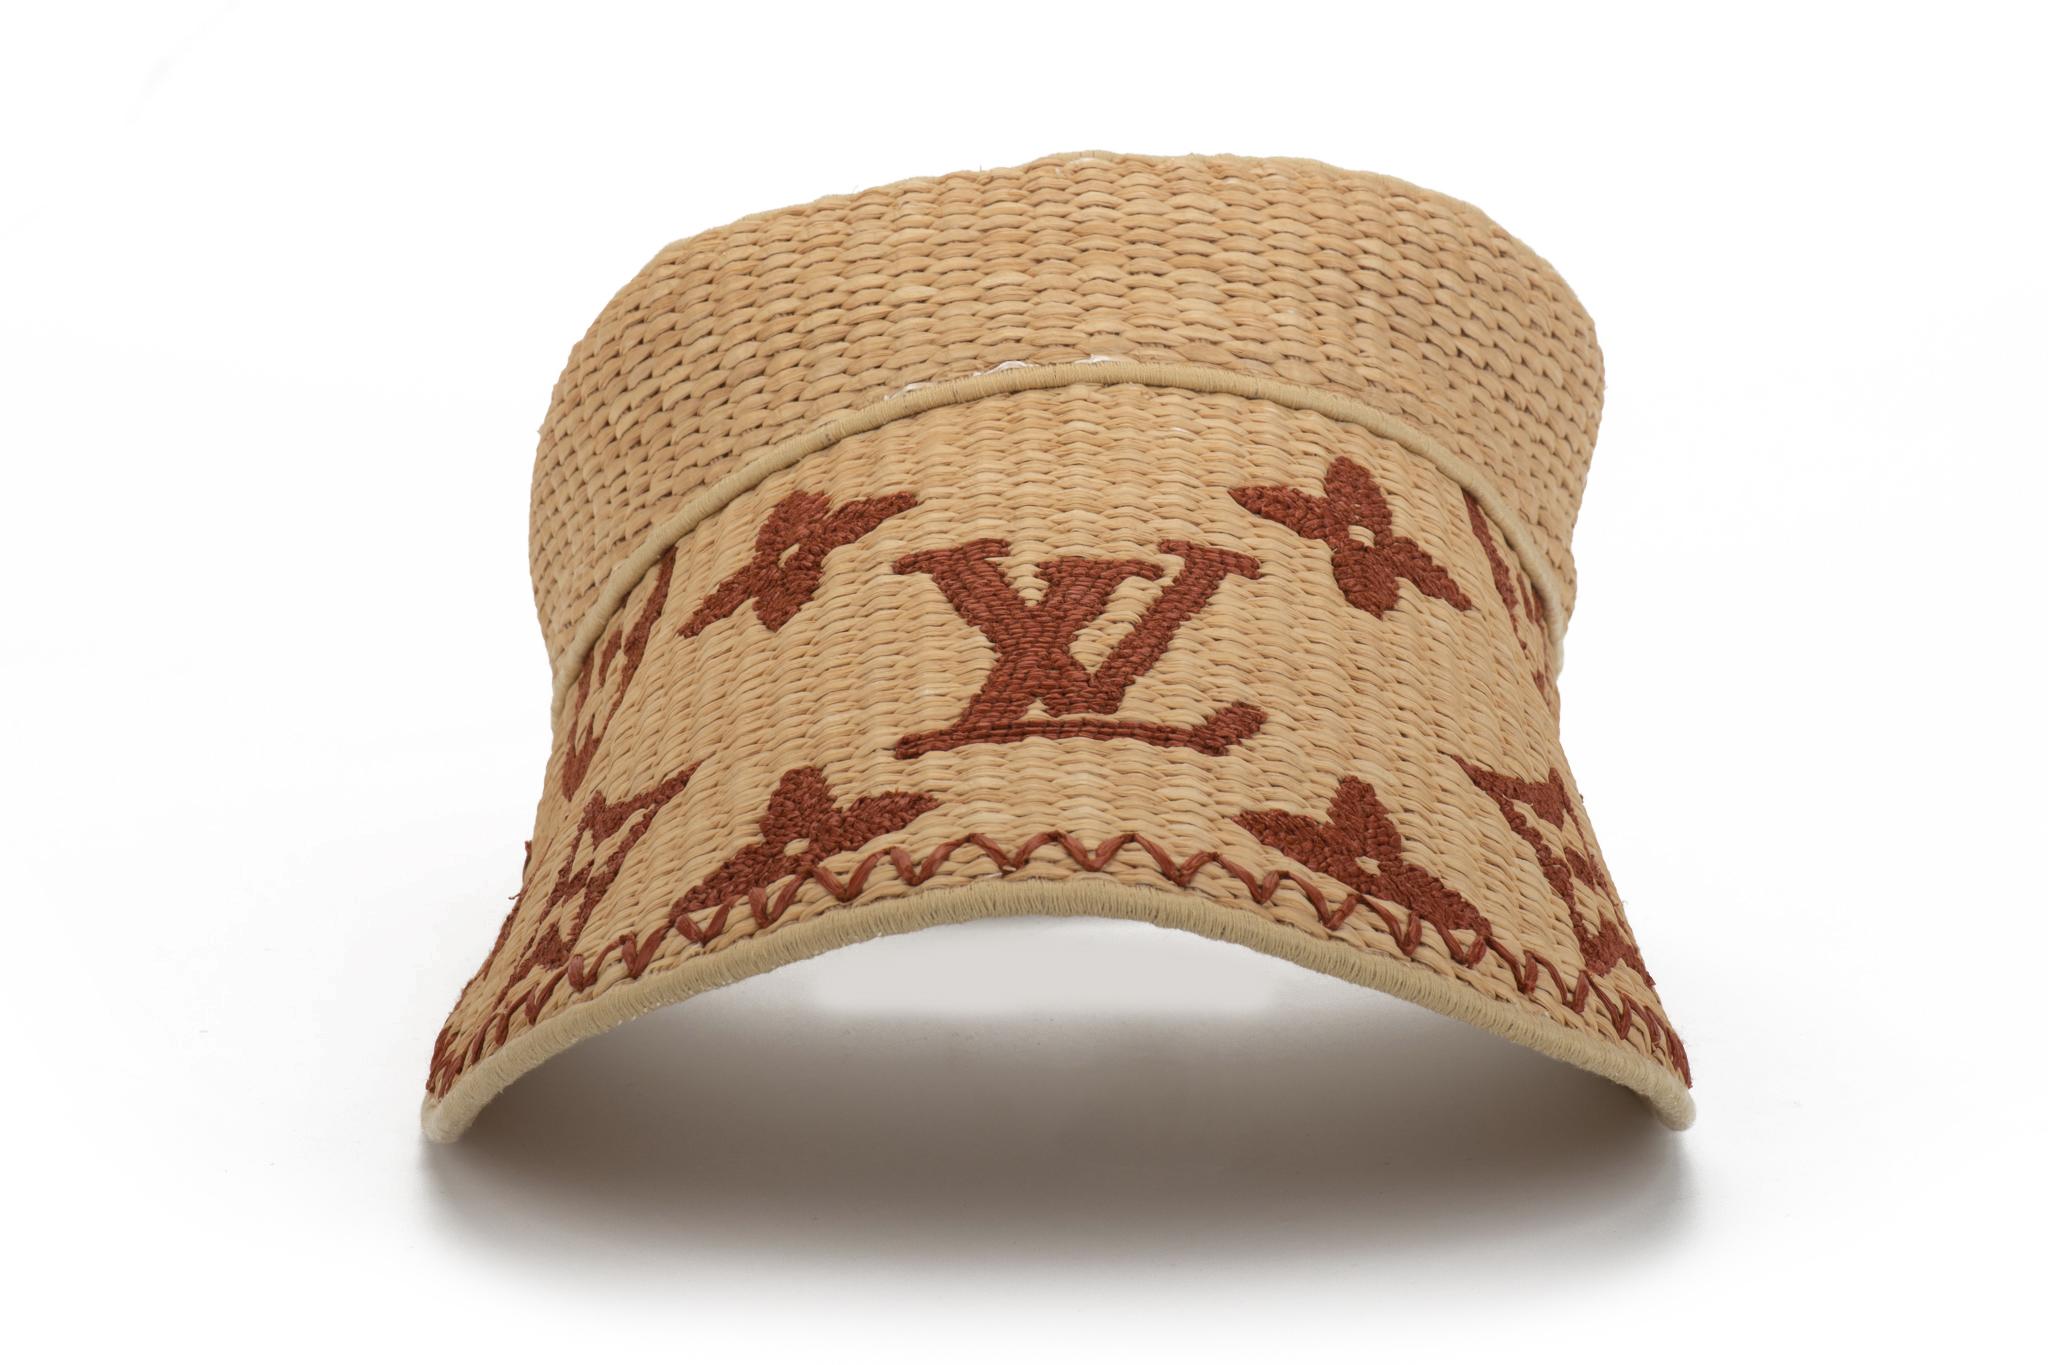 Beautiful Raffia Visor, Completely sold-out. From the By the Pool collection, summer 2021. Brand new, all tags still attached. Will include original box. One size fits all. Bought directly from Louis Vuitton, special order.